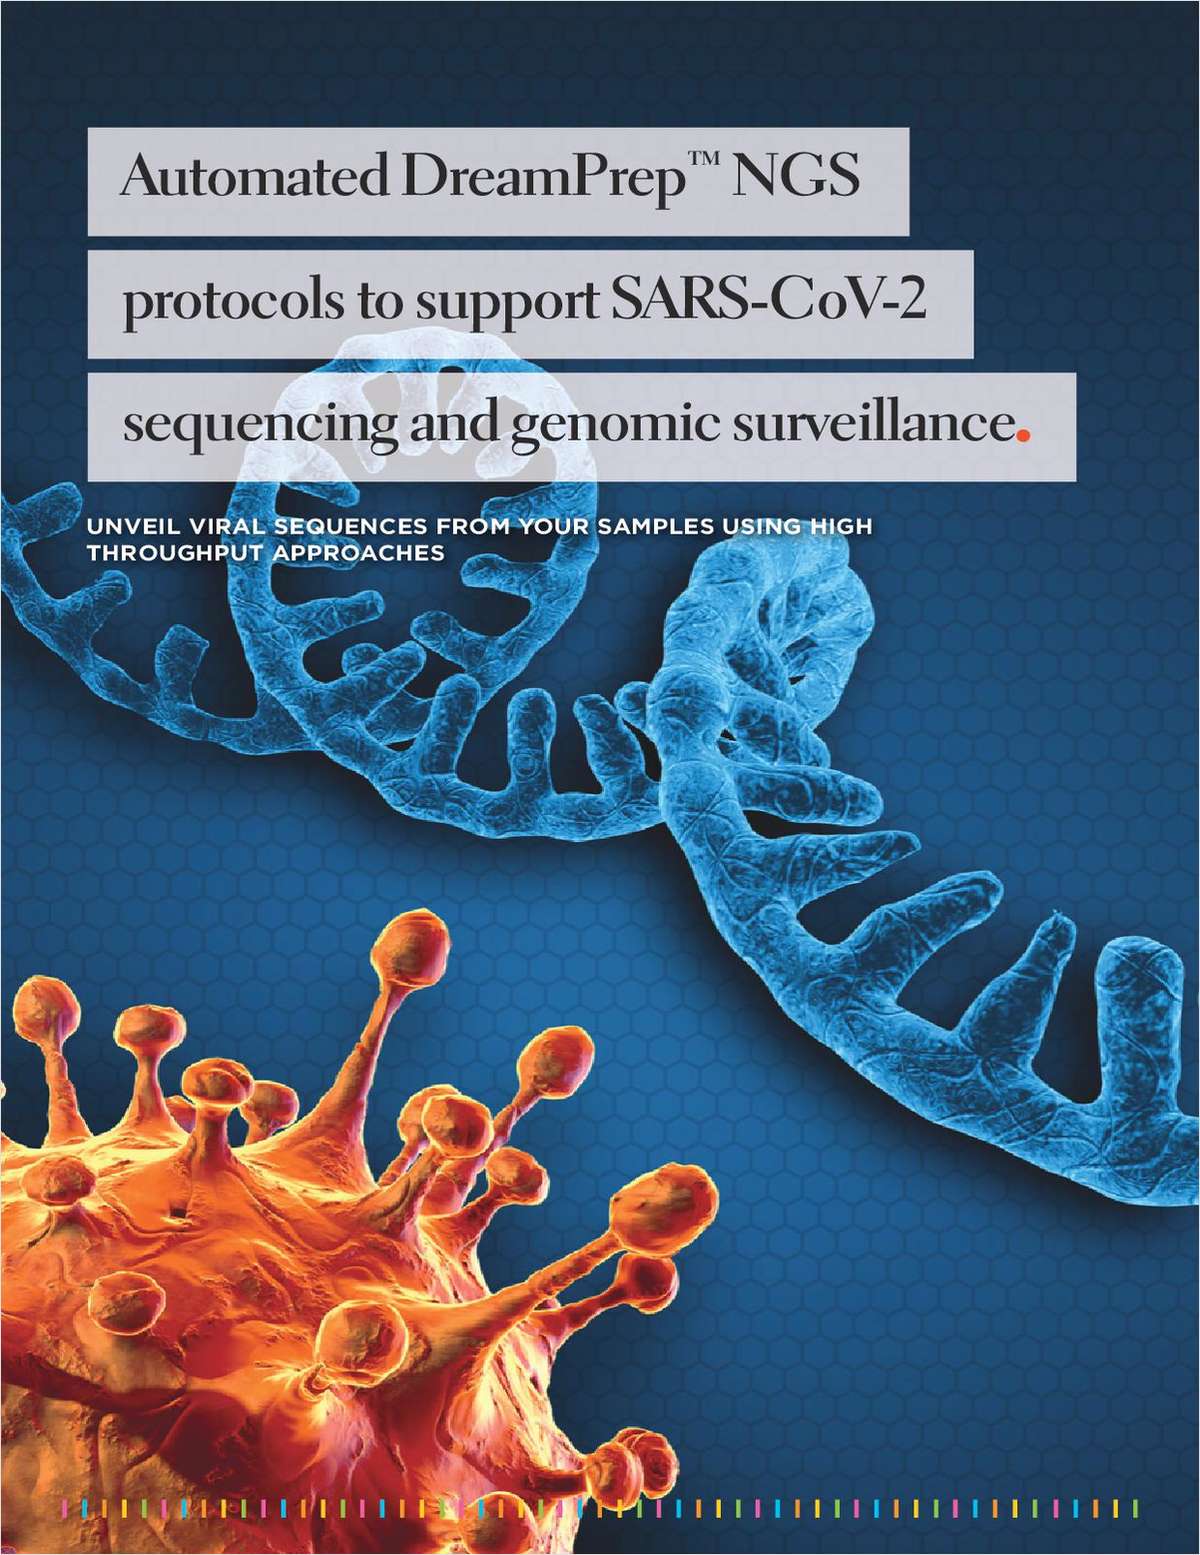 Automated Dreamprep NGS Protocols to Support SARS-Cov-2 Sequencing and Genomic Surveillance